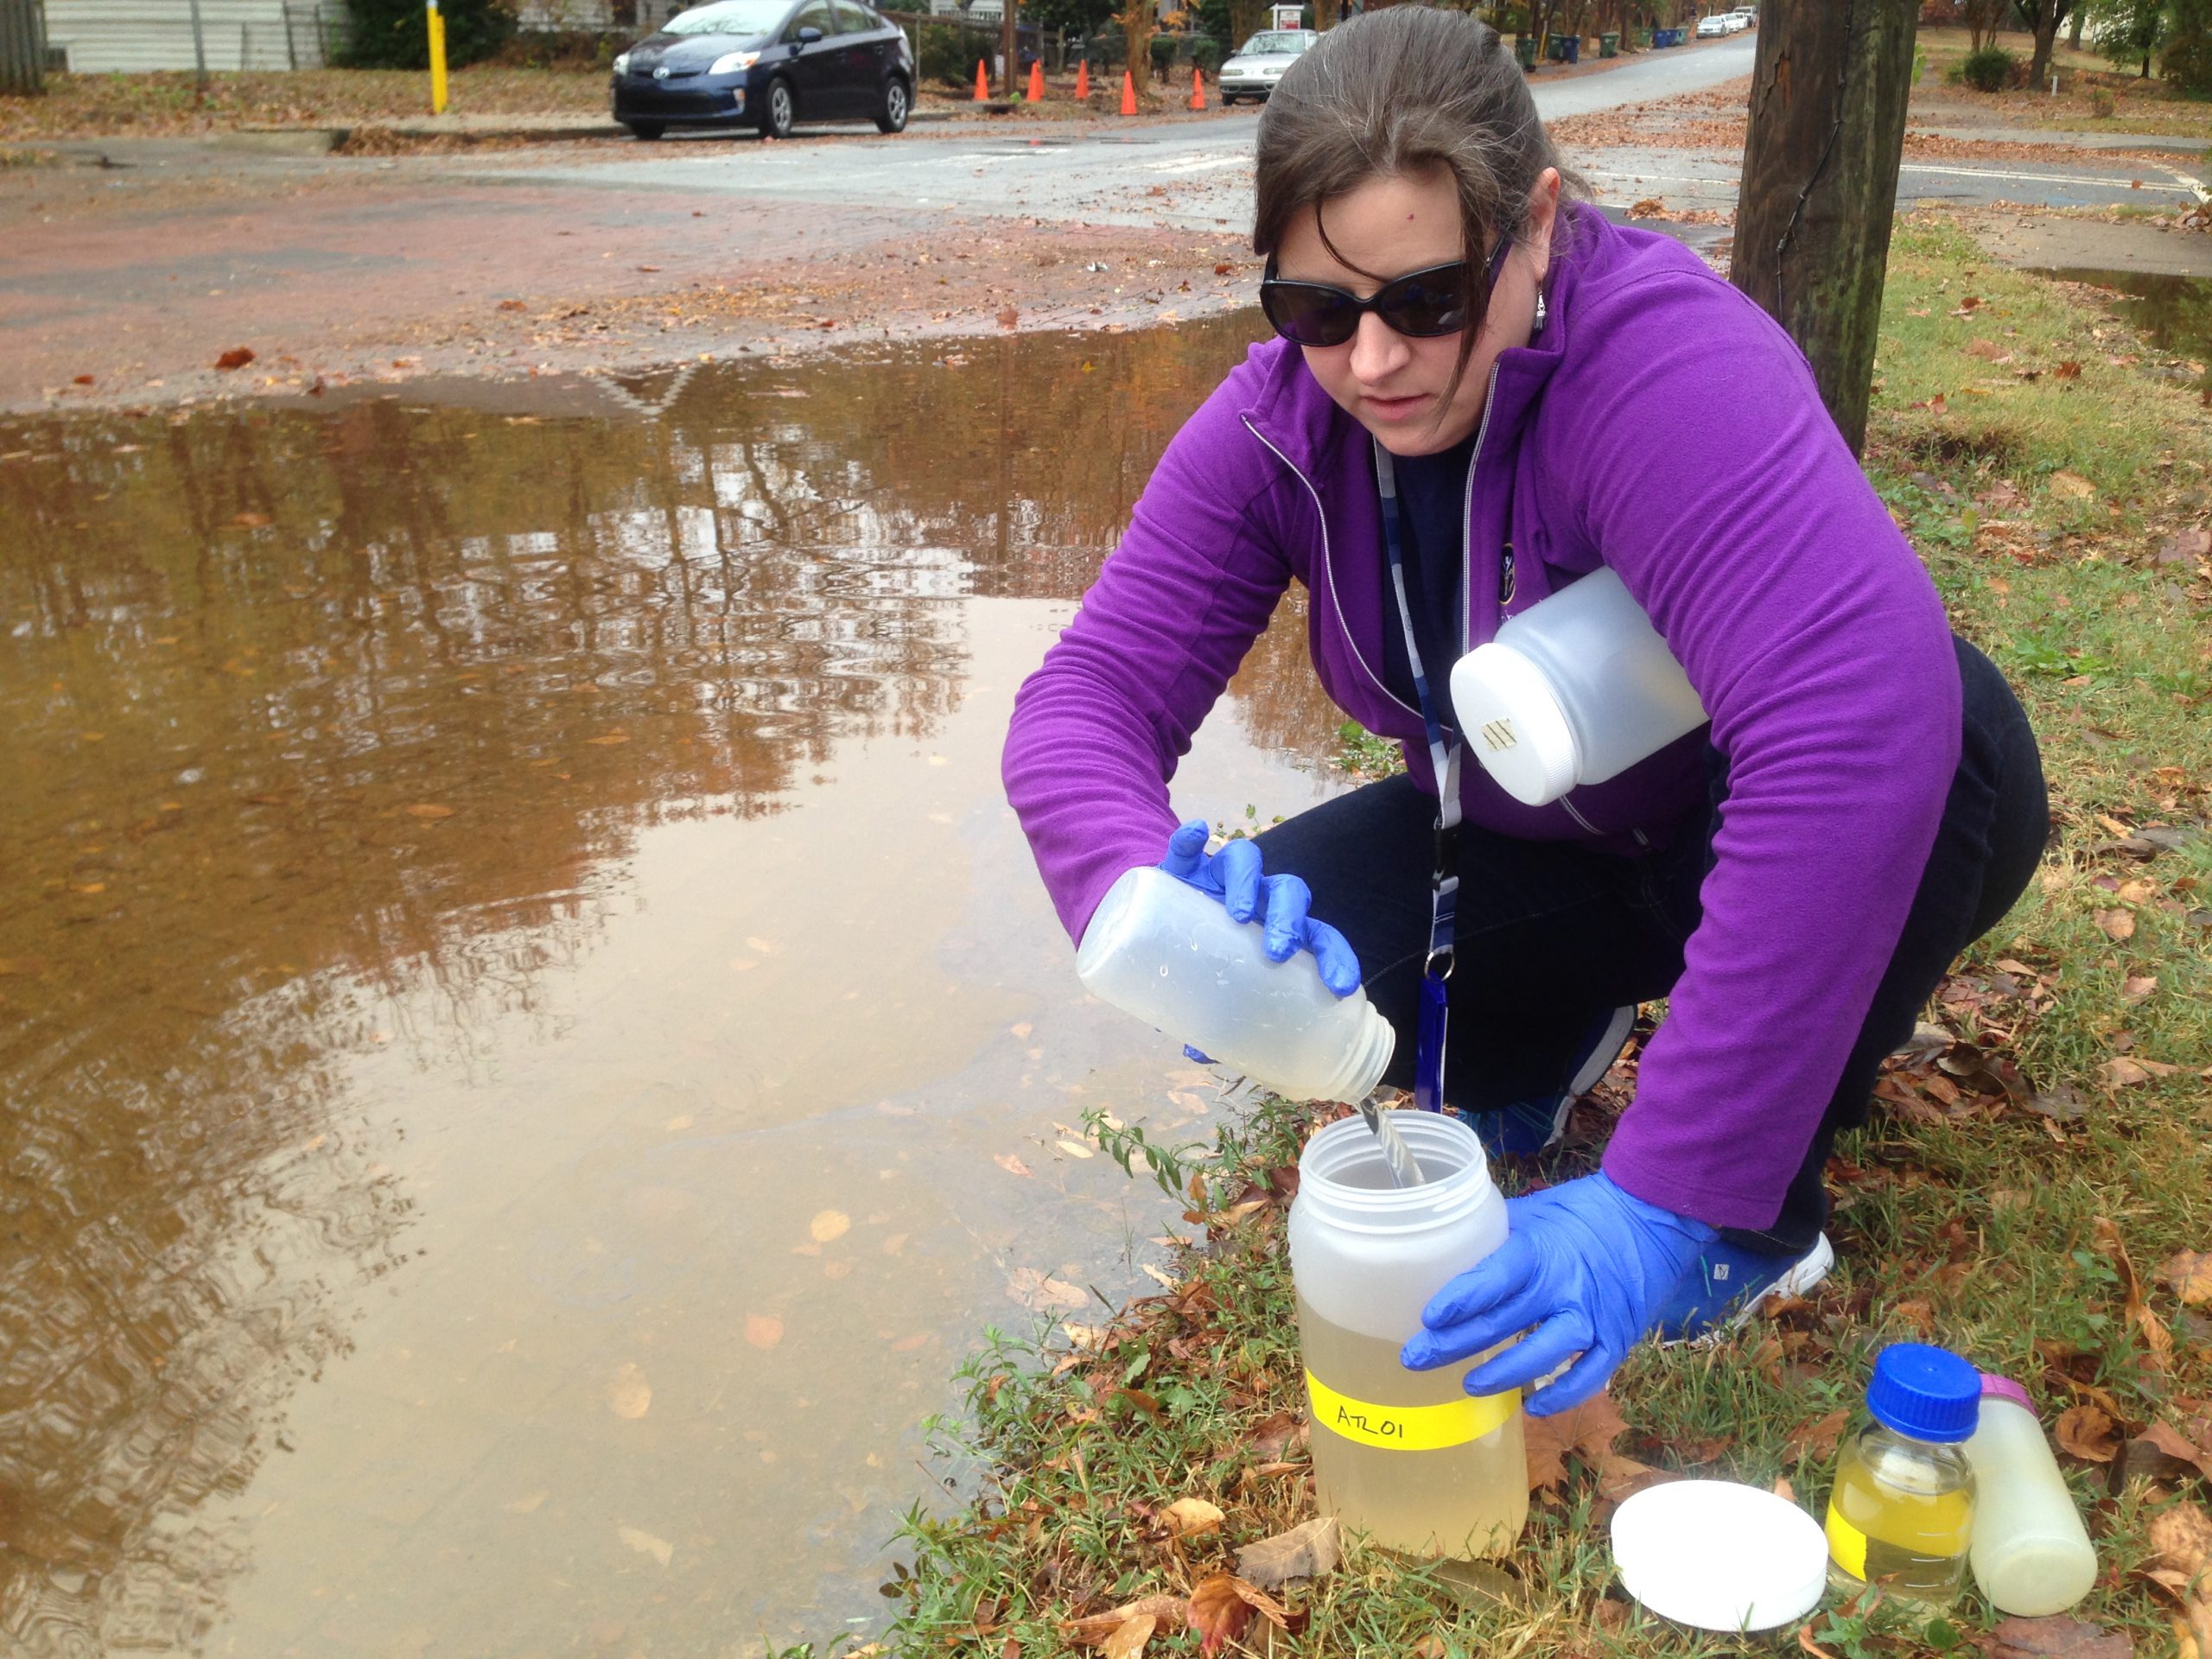 A photo of CDC microbiologist Amy Kirby kneeling next to a large puddle of floodwater pouring a sample into a large container.